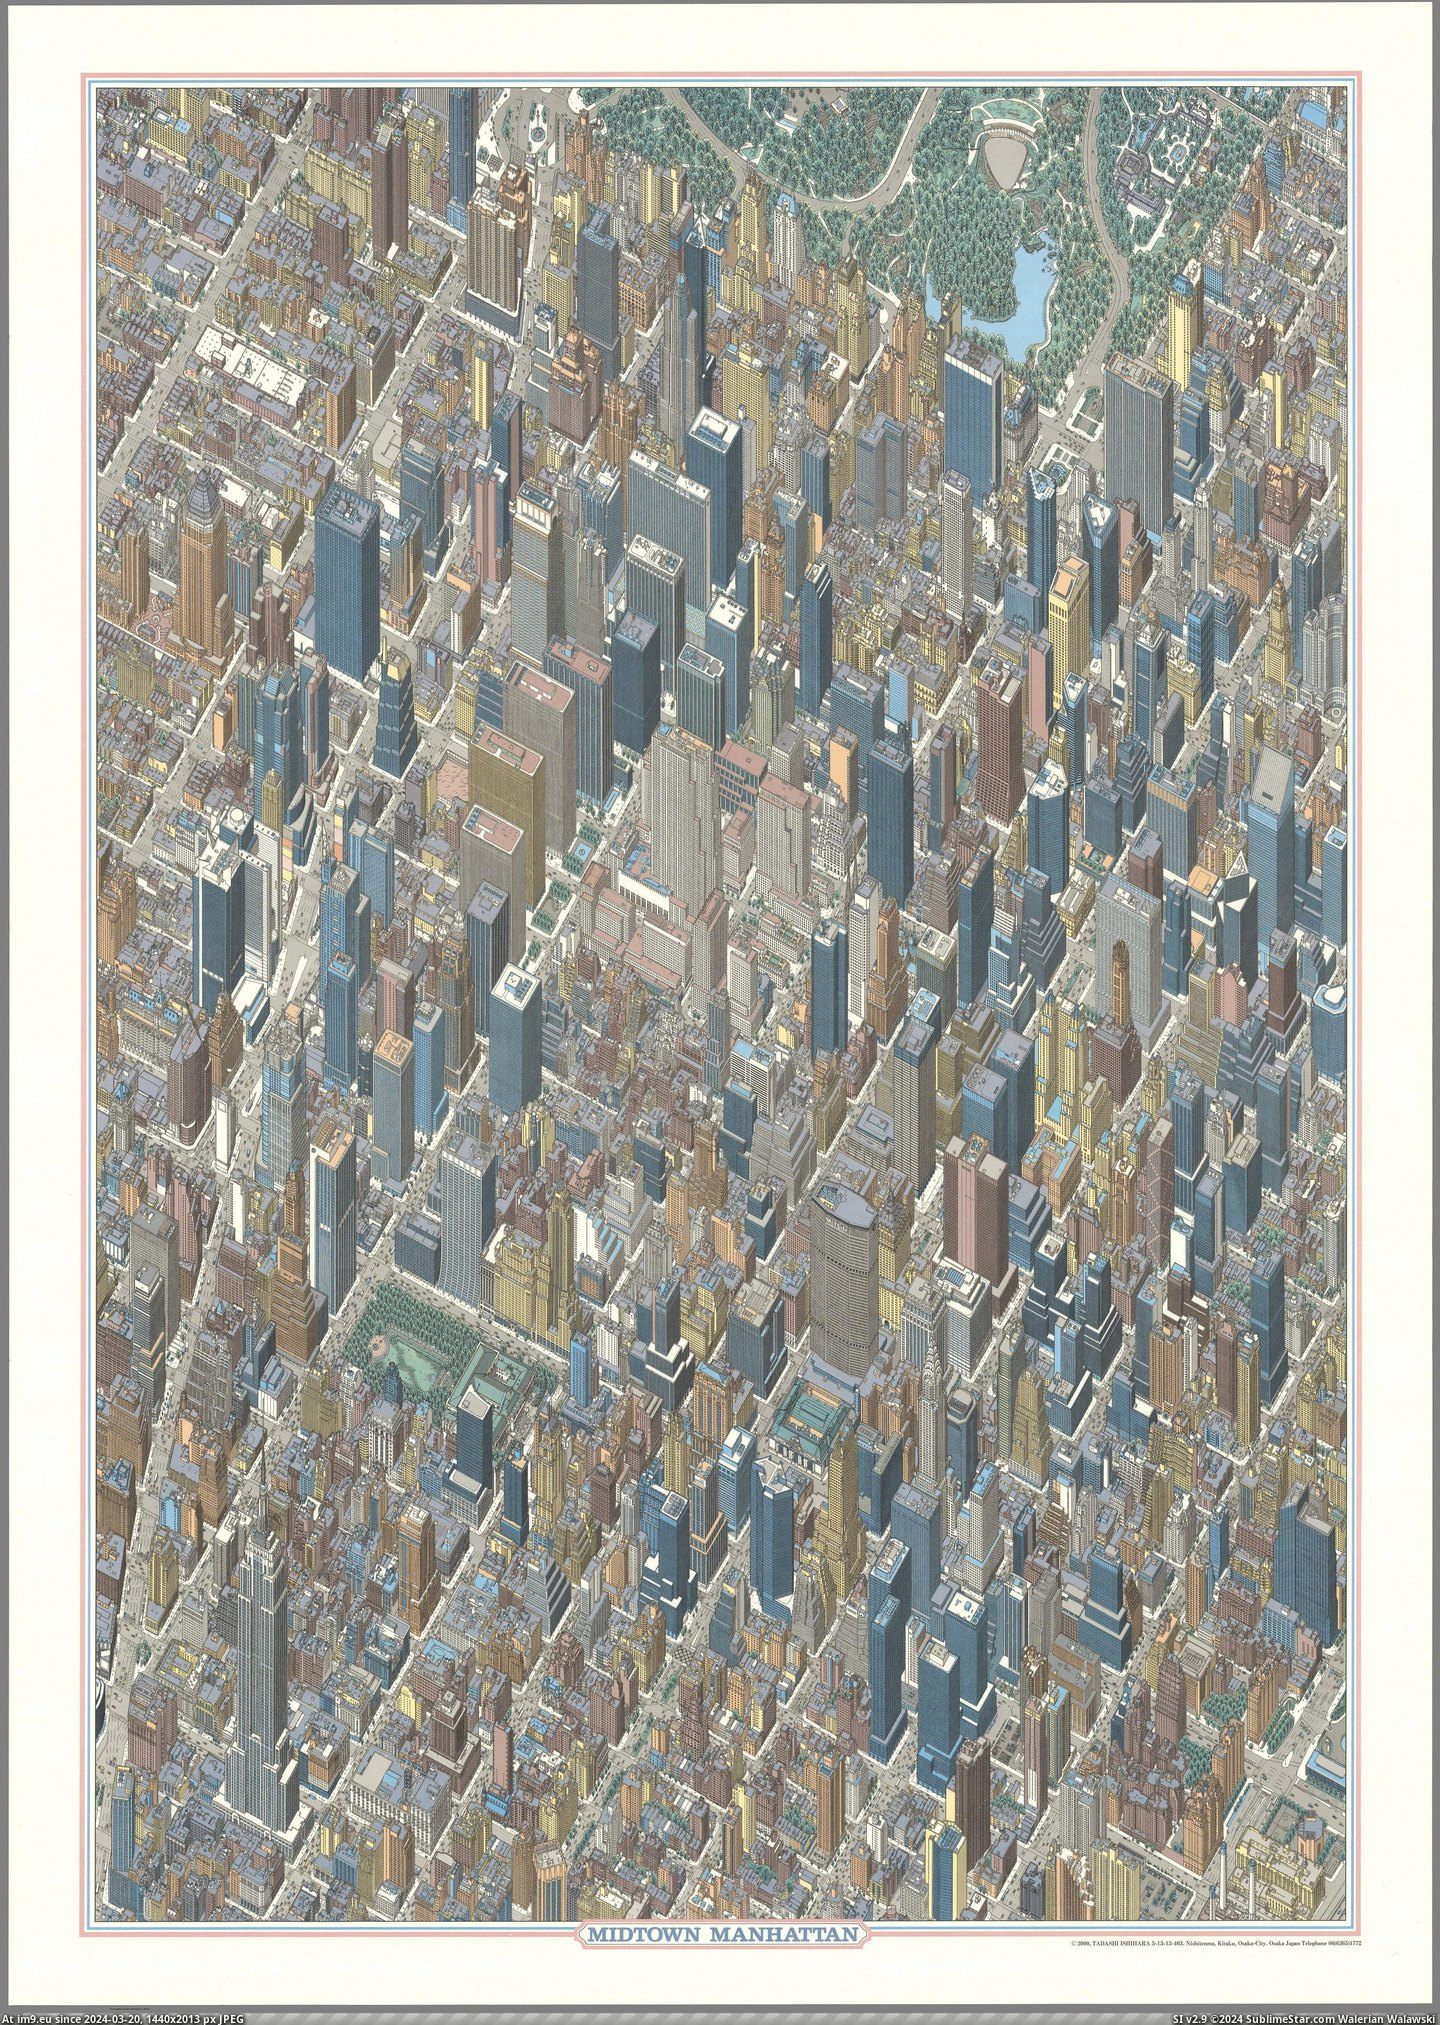 #Hentai #Nyc #Drawing #Papertowns #Tadashi #Manhattan #Midtown #Ishihara [Mapporn] Drawing of Midtown Manhattan, made by: Tadashi Ishihara (2000)[3028x4245] ( -r-papertowns and -r-nyc) Pic. (Изображение из альбом My r/MAPS favs))